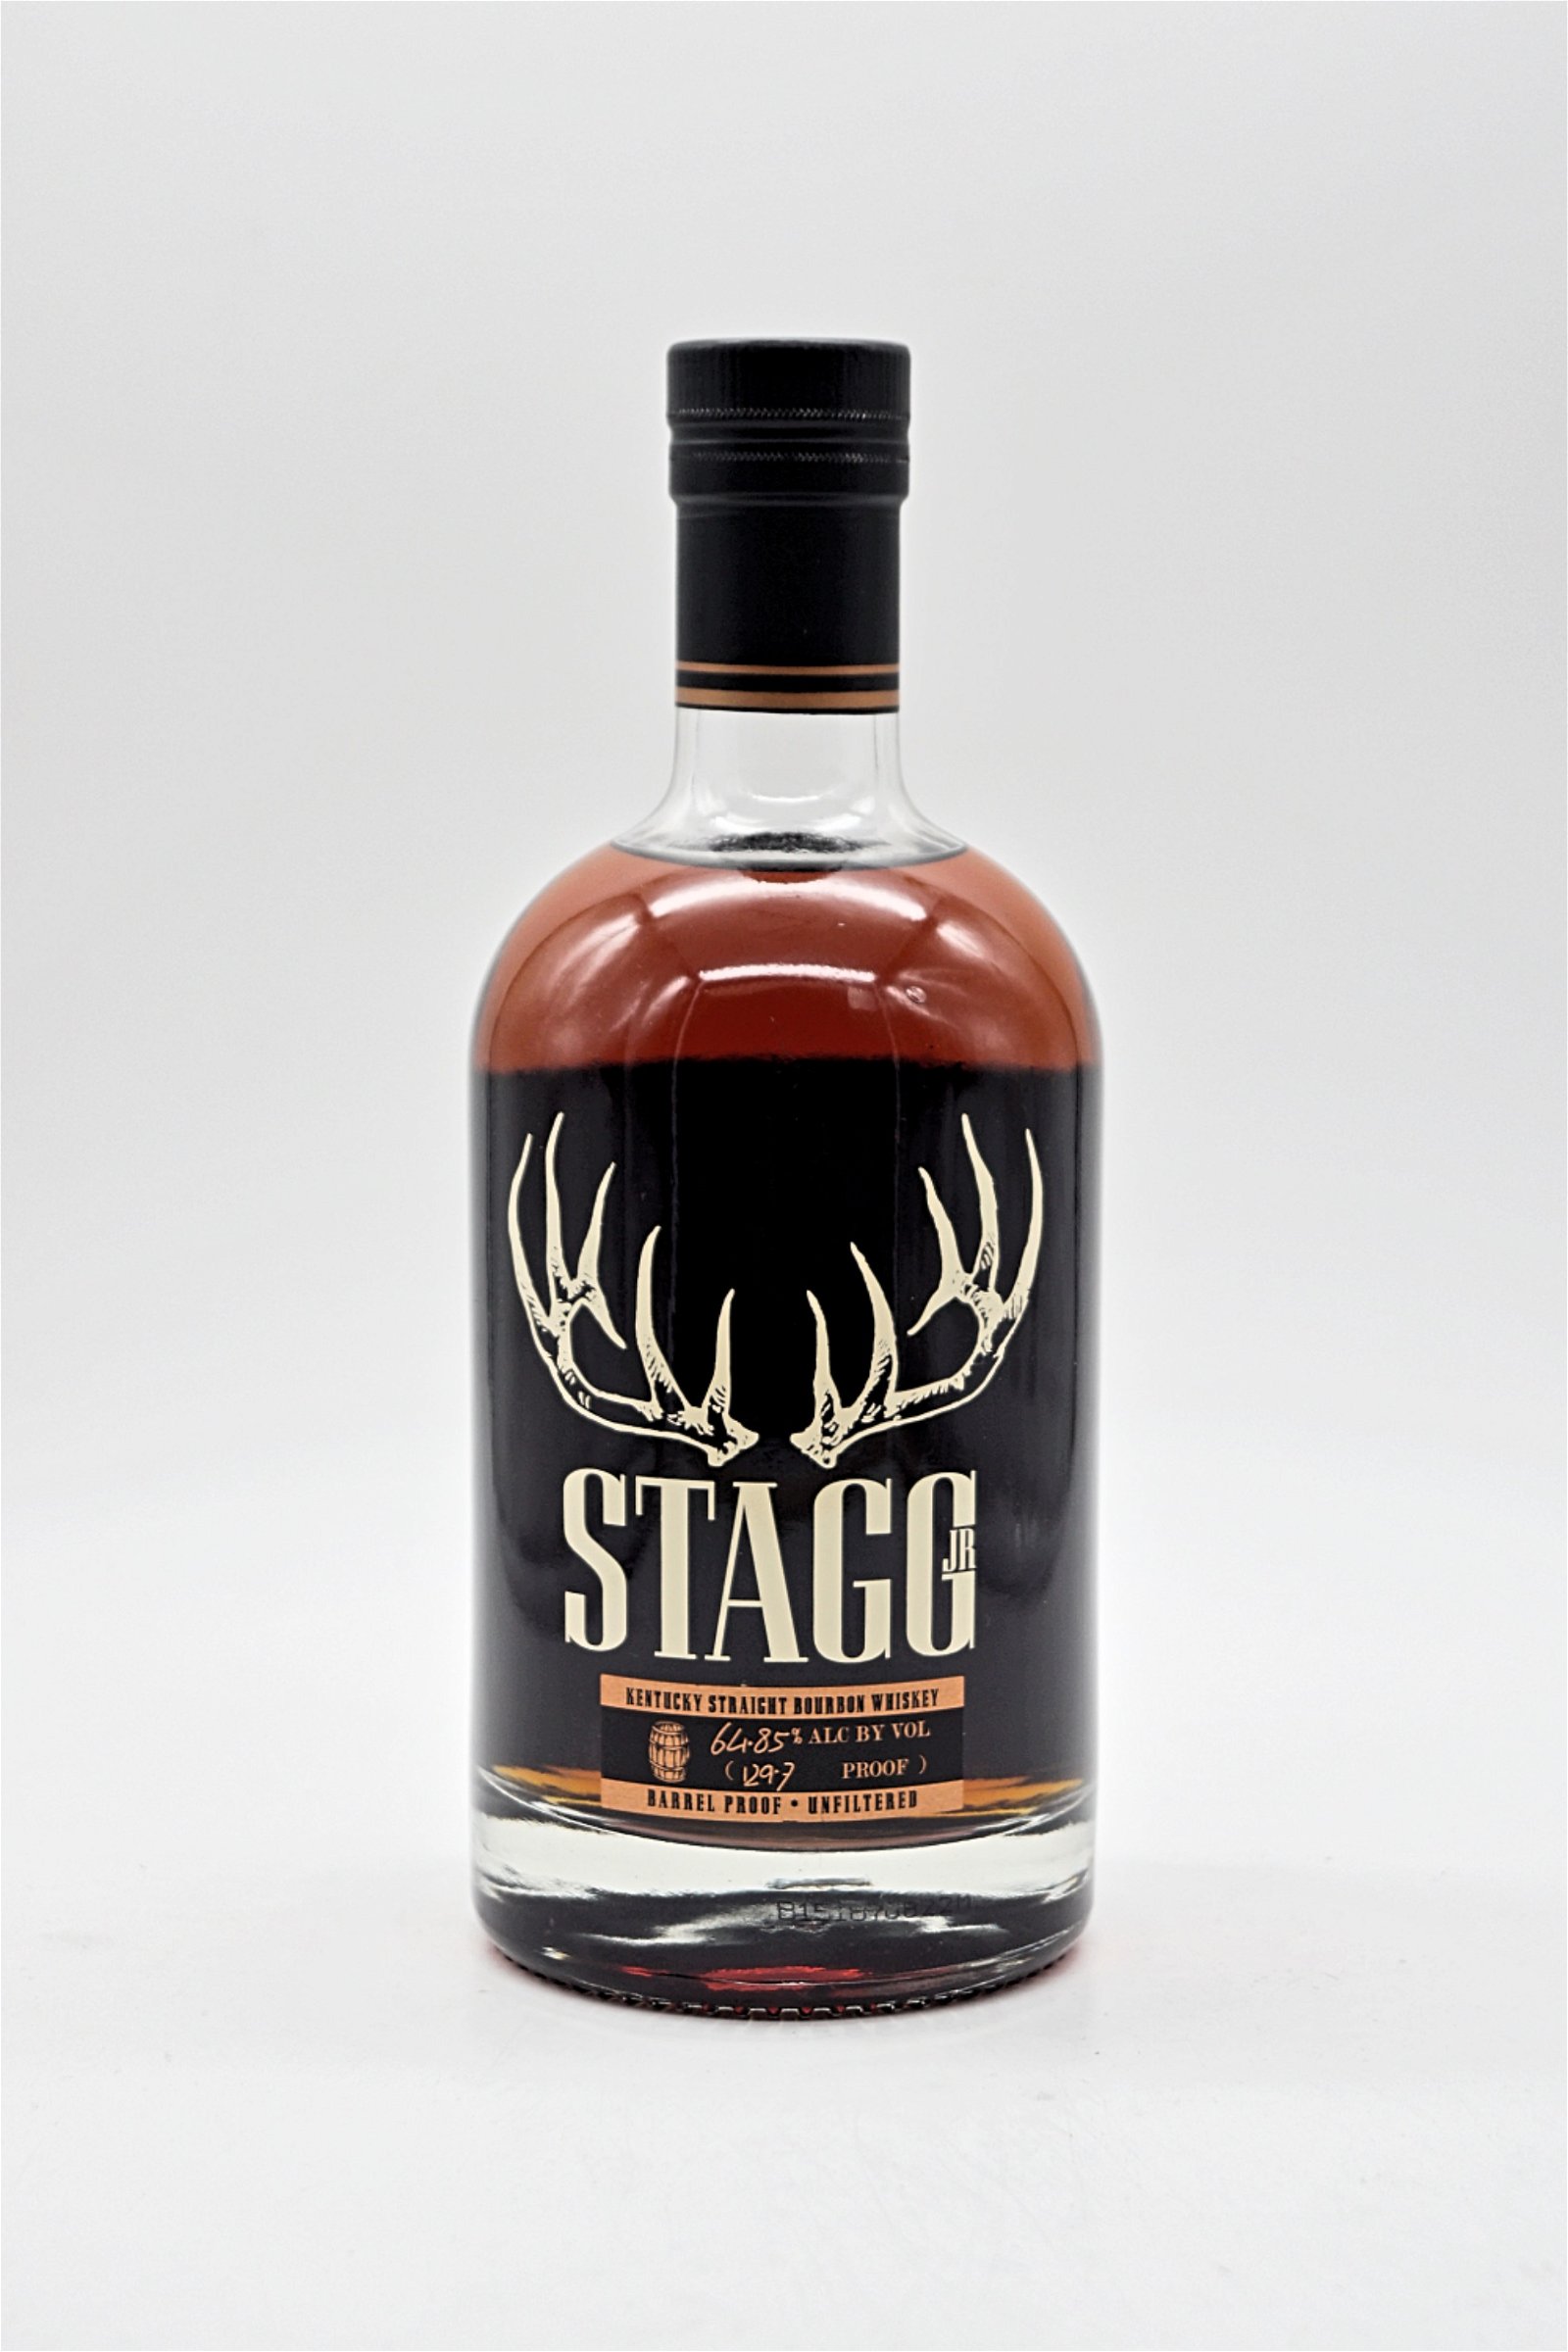 Stagg JR Kentucky Straight Bourbon Whiskey 129,7 Proof